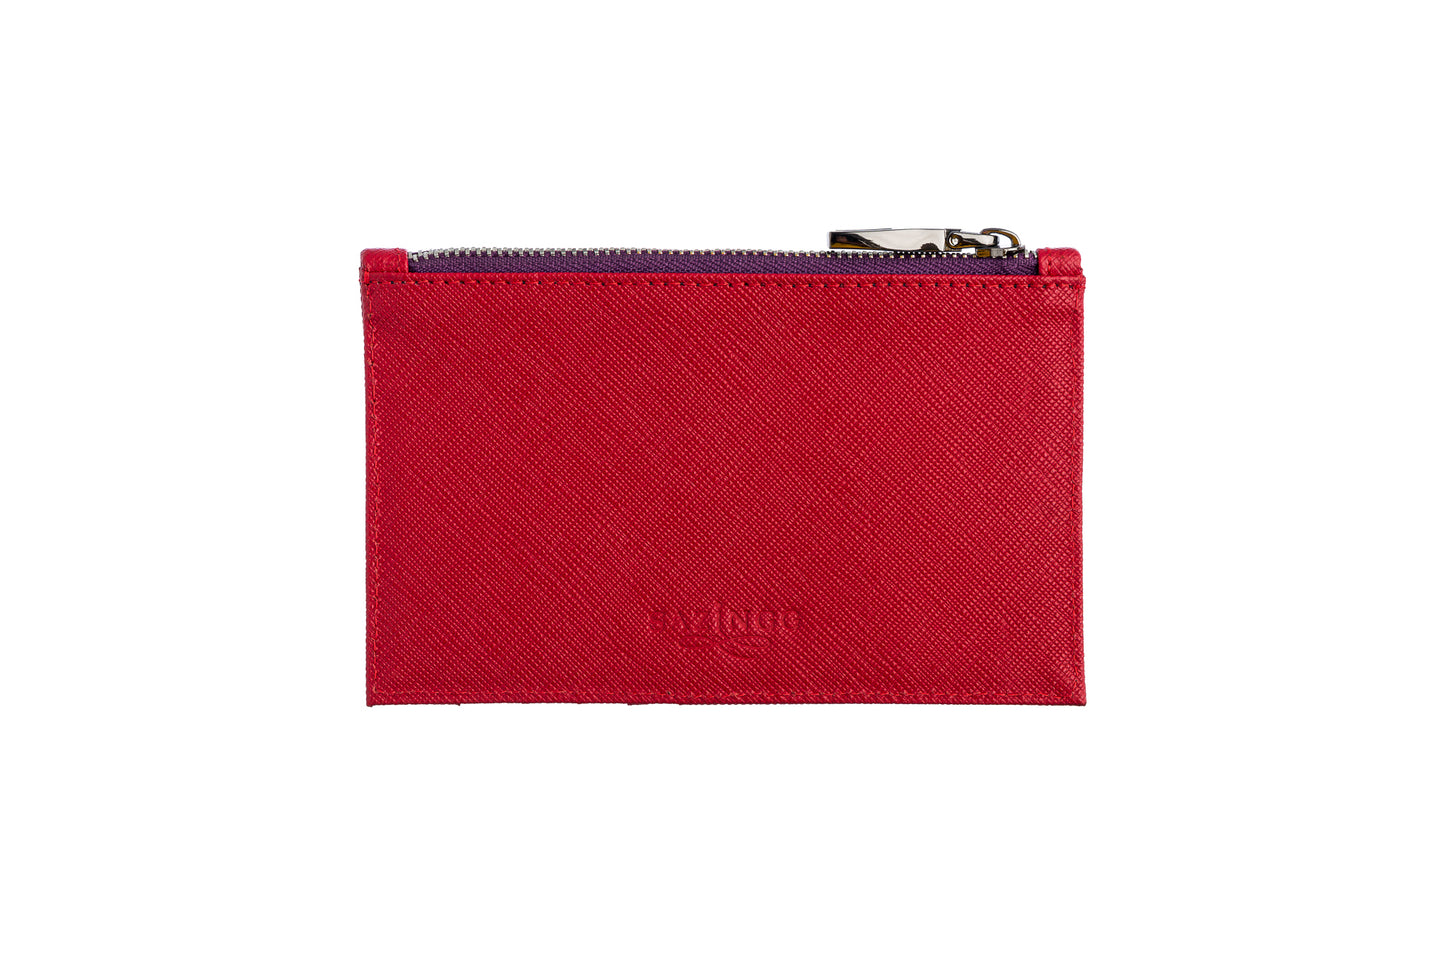 Load image into Gallery viewer, Credit Card Zip Pouch in Red Textured Leather
